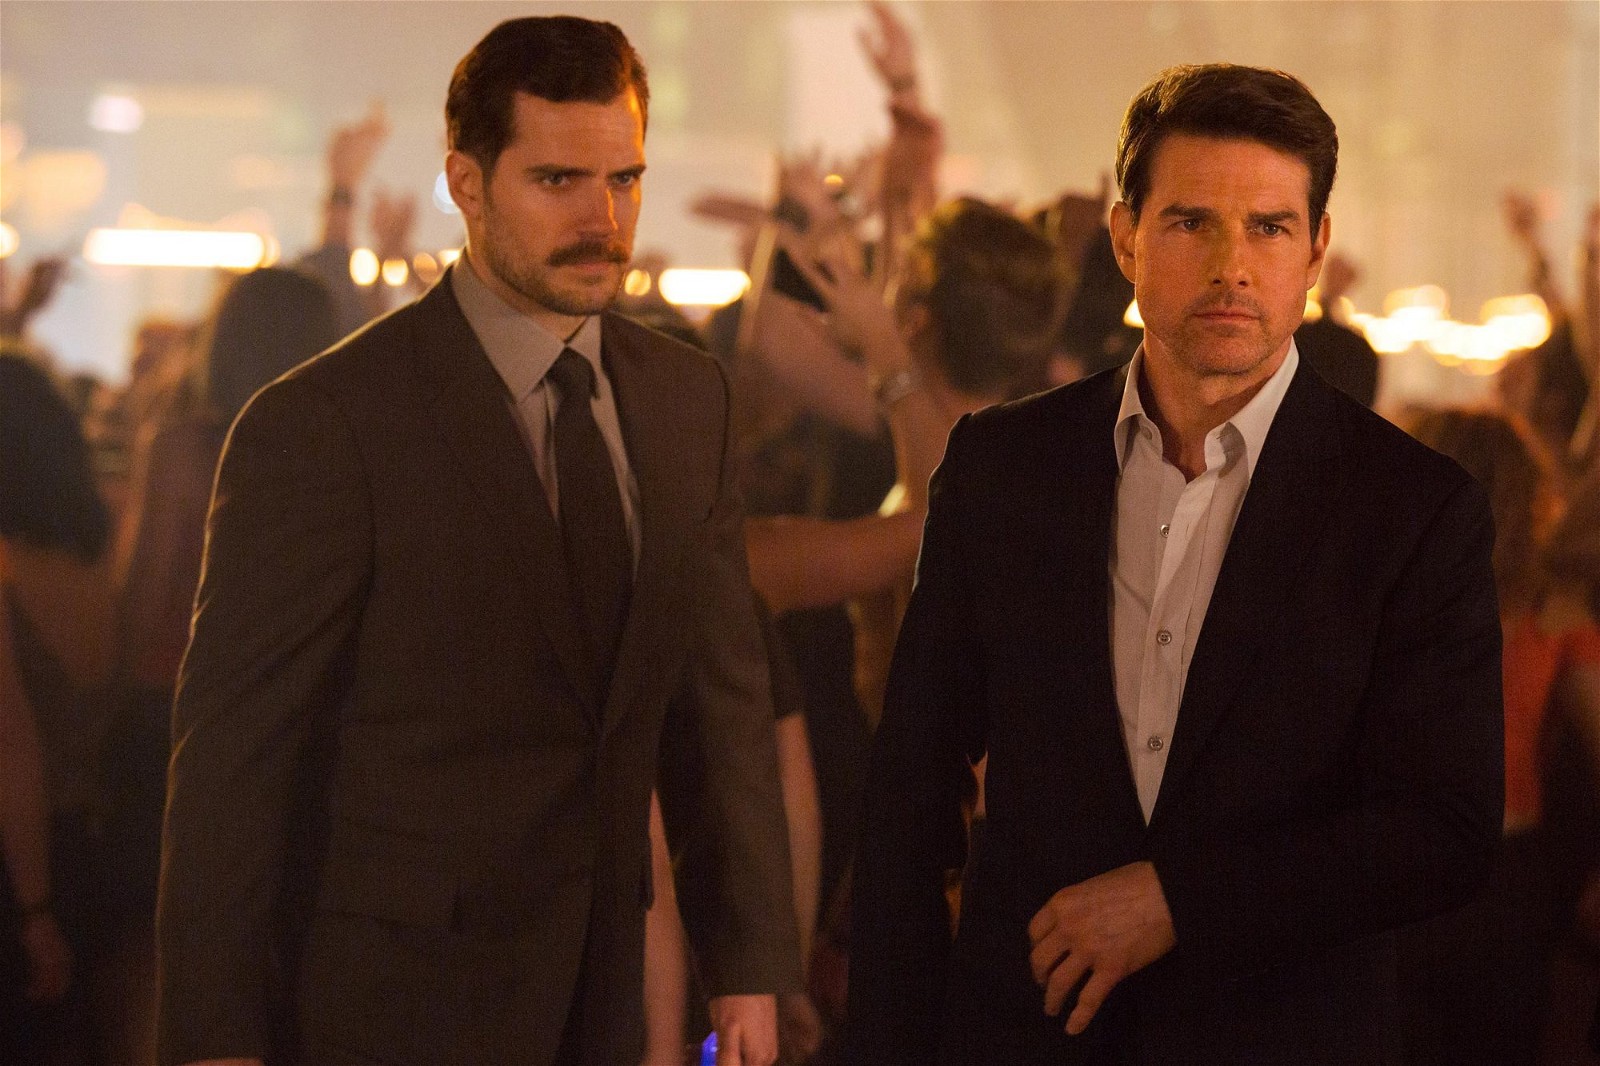 Henry Cavill and Tom Cruise in Mission: Impossible - Fallout.